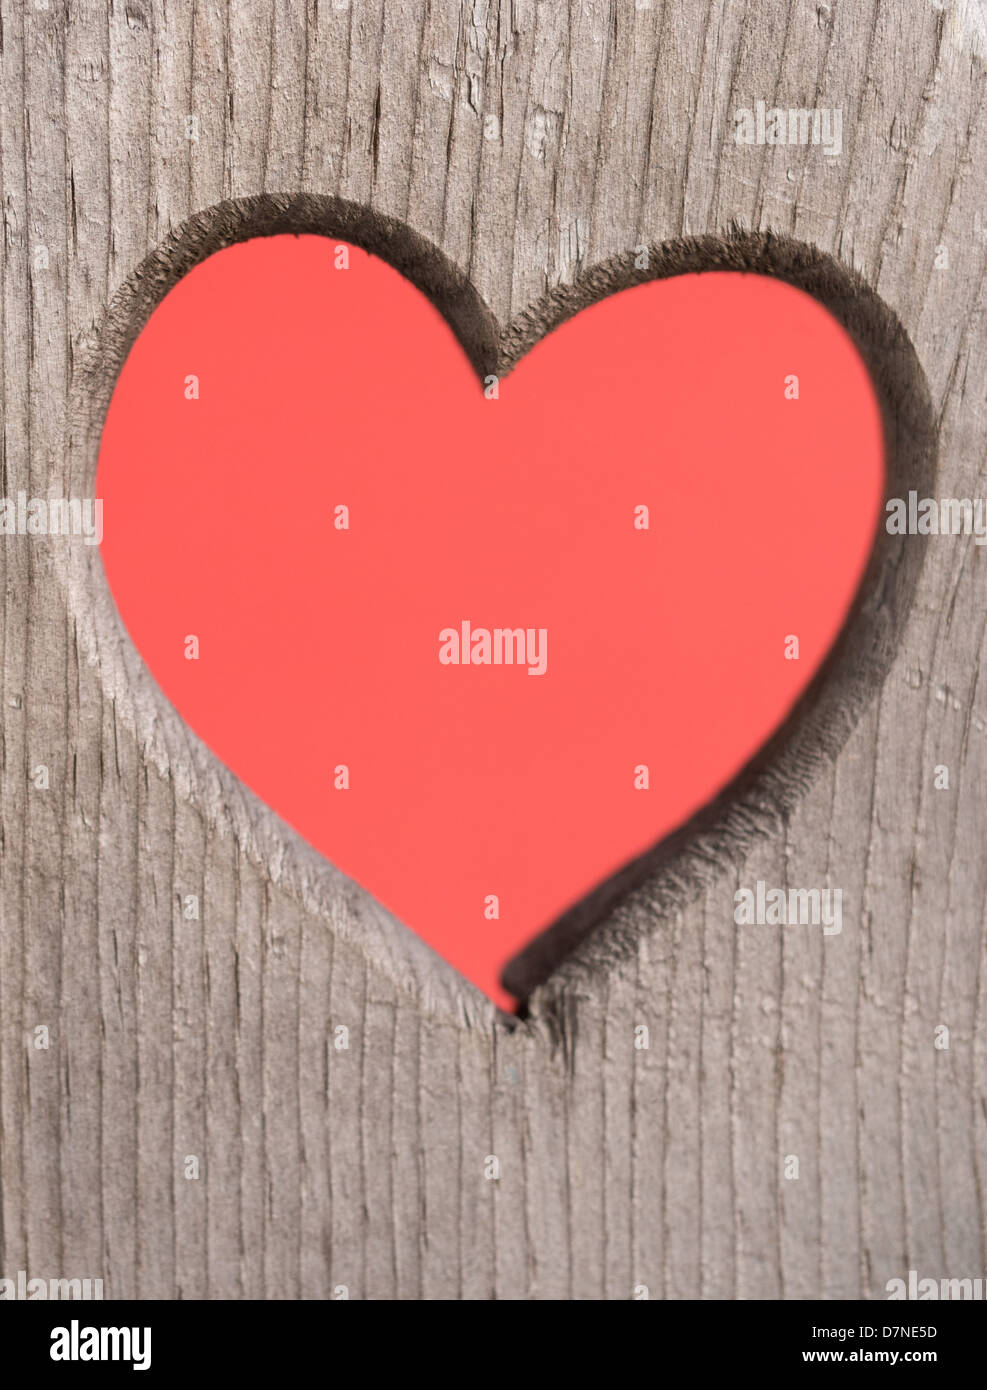 Red heart cutout in a wooden board Stock Photo